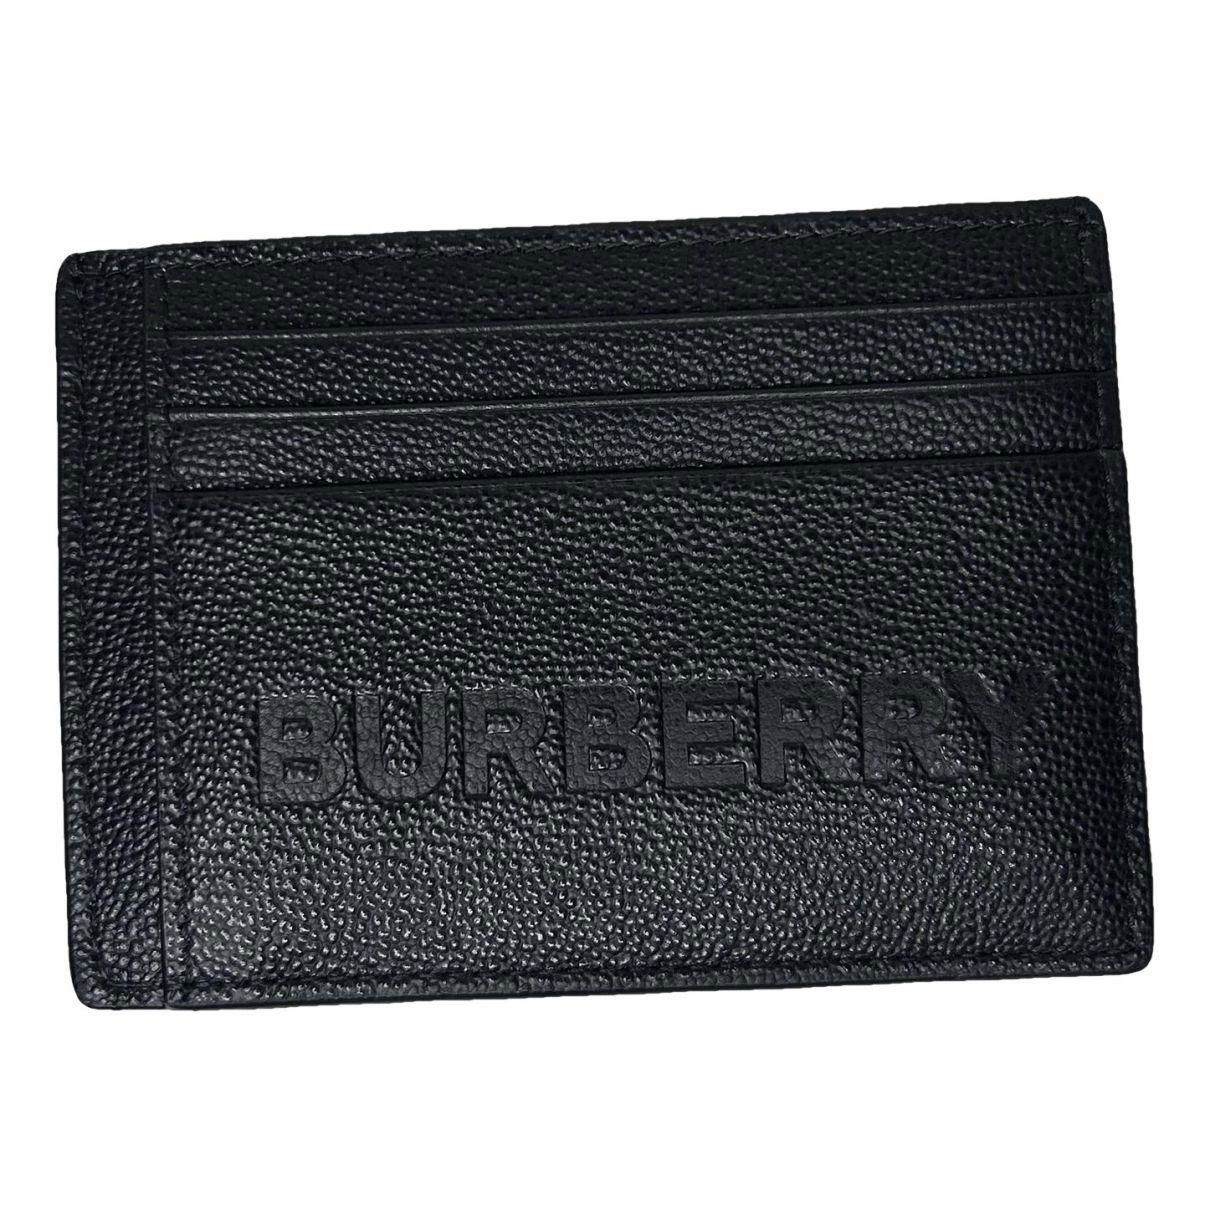 Leather small bag by BURBERRY